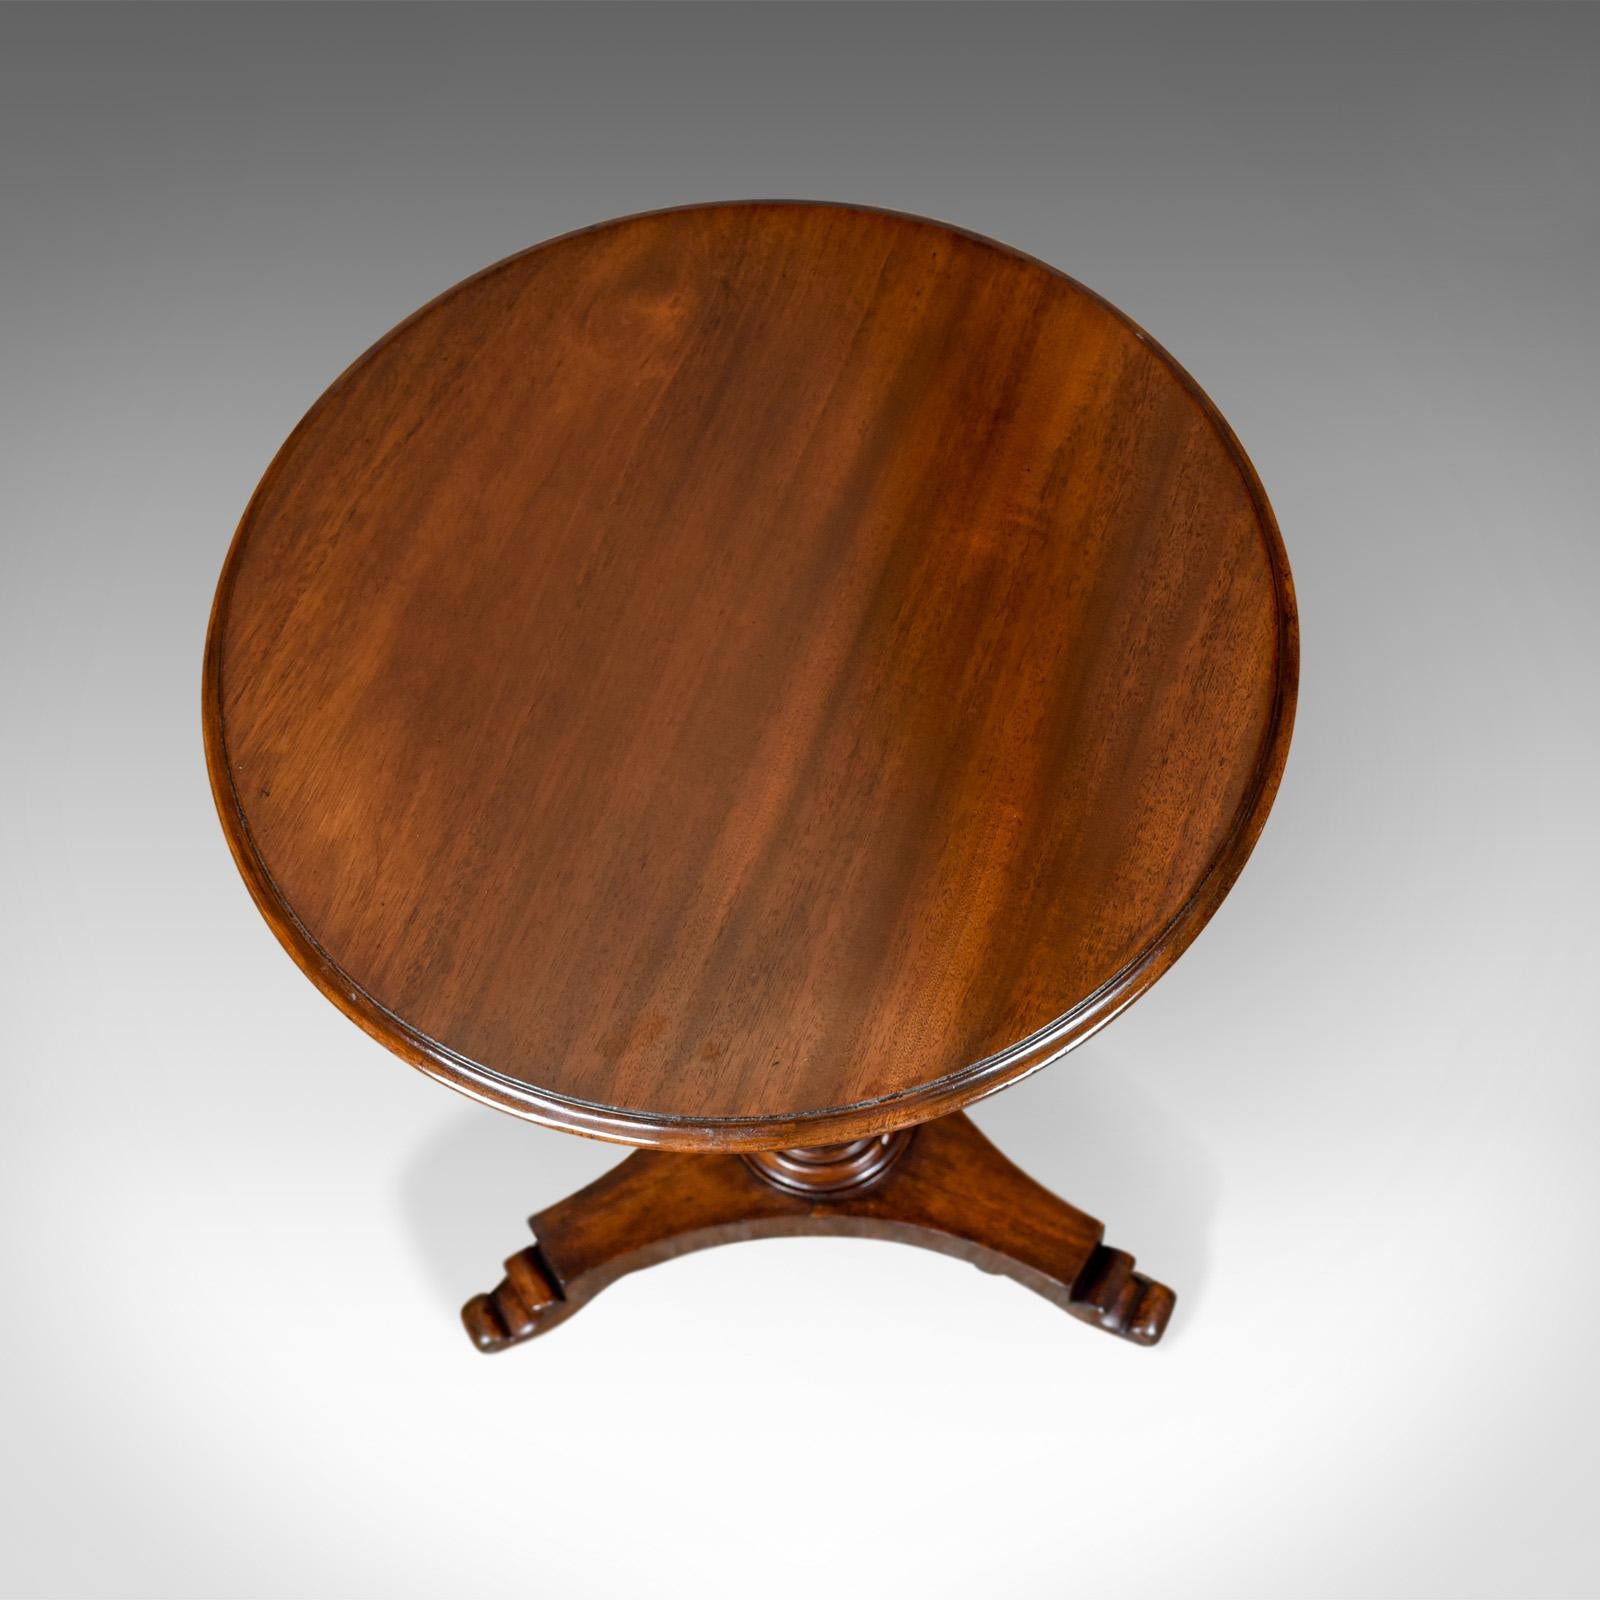 This is an antique wine table, an English, Regency, mahogany tripod side table dating to the early 19th century, circa 1830.

Attractive top, showing quality grain and fine colour
Grain interest and a desirable aged patina
Presented in very good